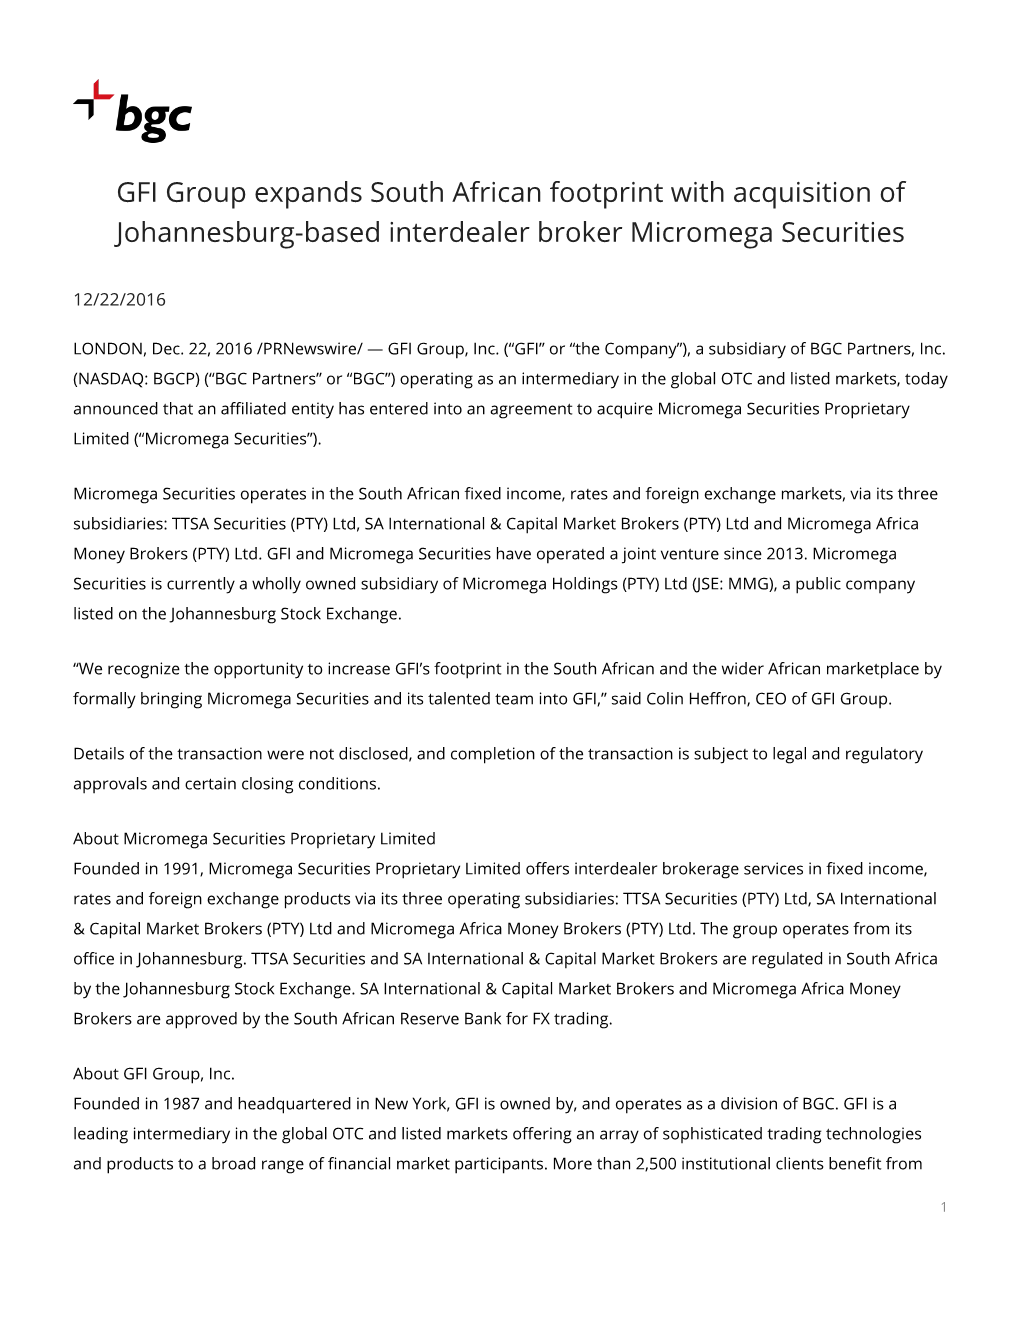 GFI Group Expands South African Footprint with Acquisition of Johannesburg-Based Interdealer Broker Micromega Securities